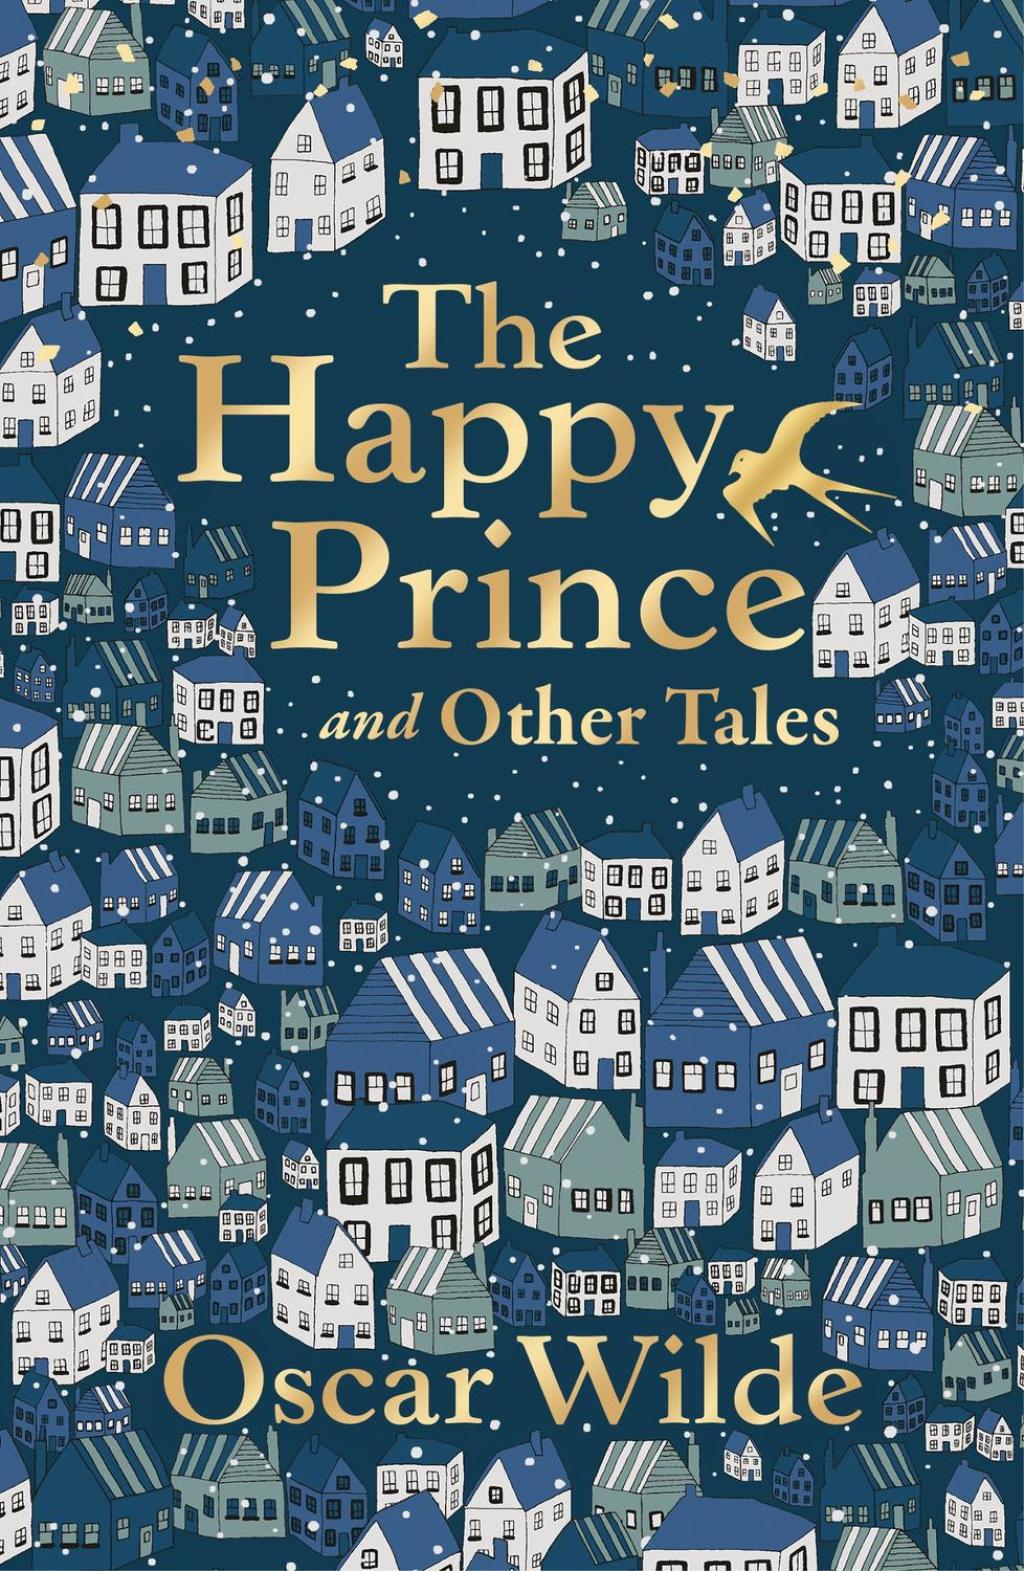 The Happy Prince and Other Tales (eBook) - Oscar Wilde,